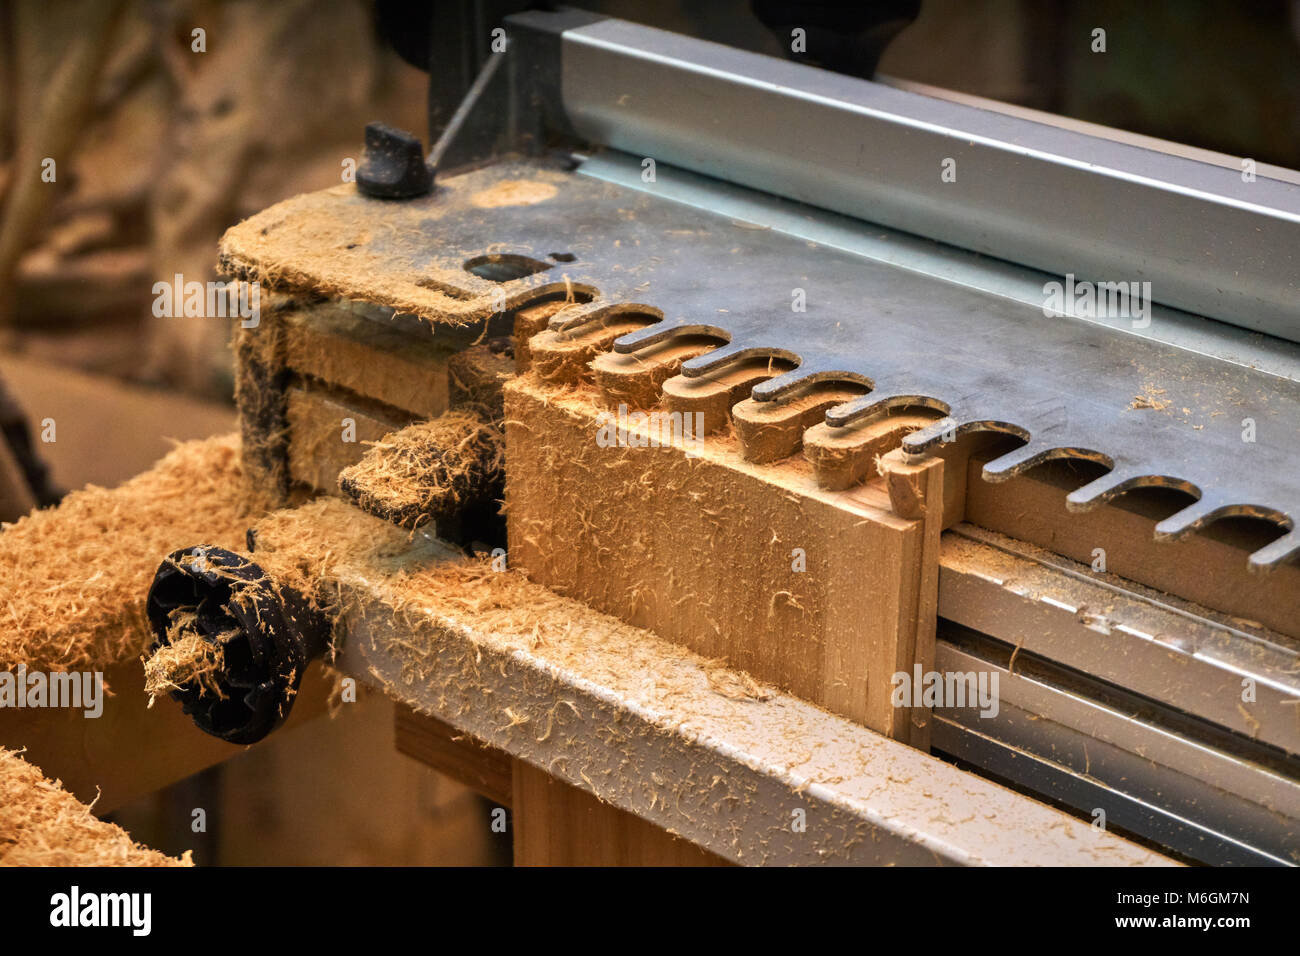 Dovetail joint. Woodworking and carpentry production. Part of a wooden drawer made with a milling machine. Close-up Stock Photo